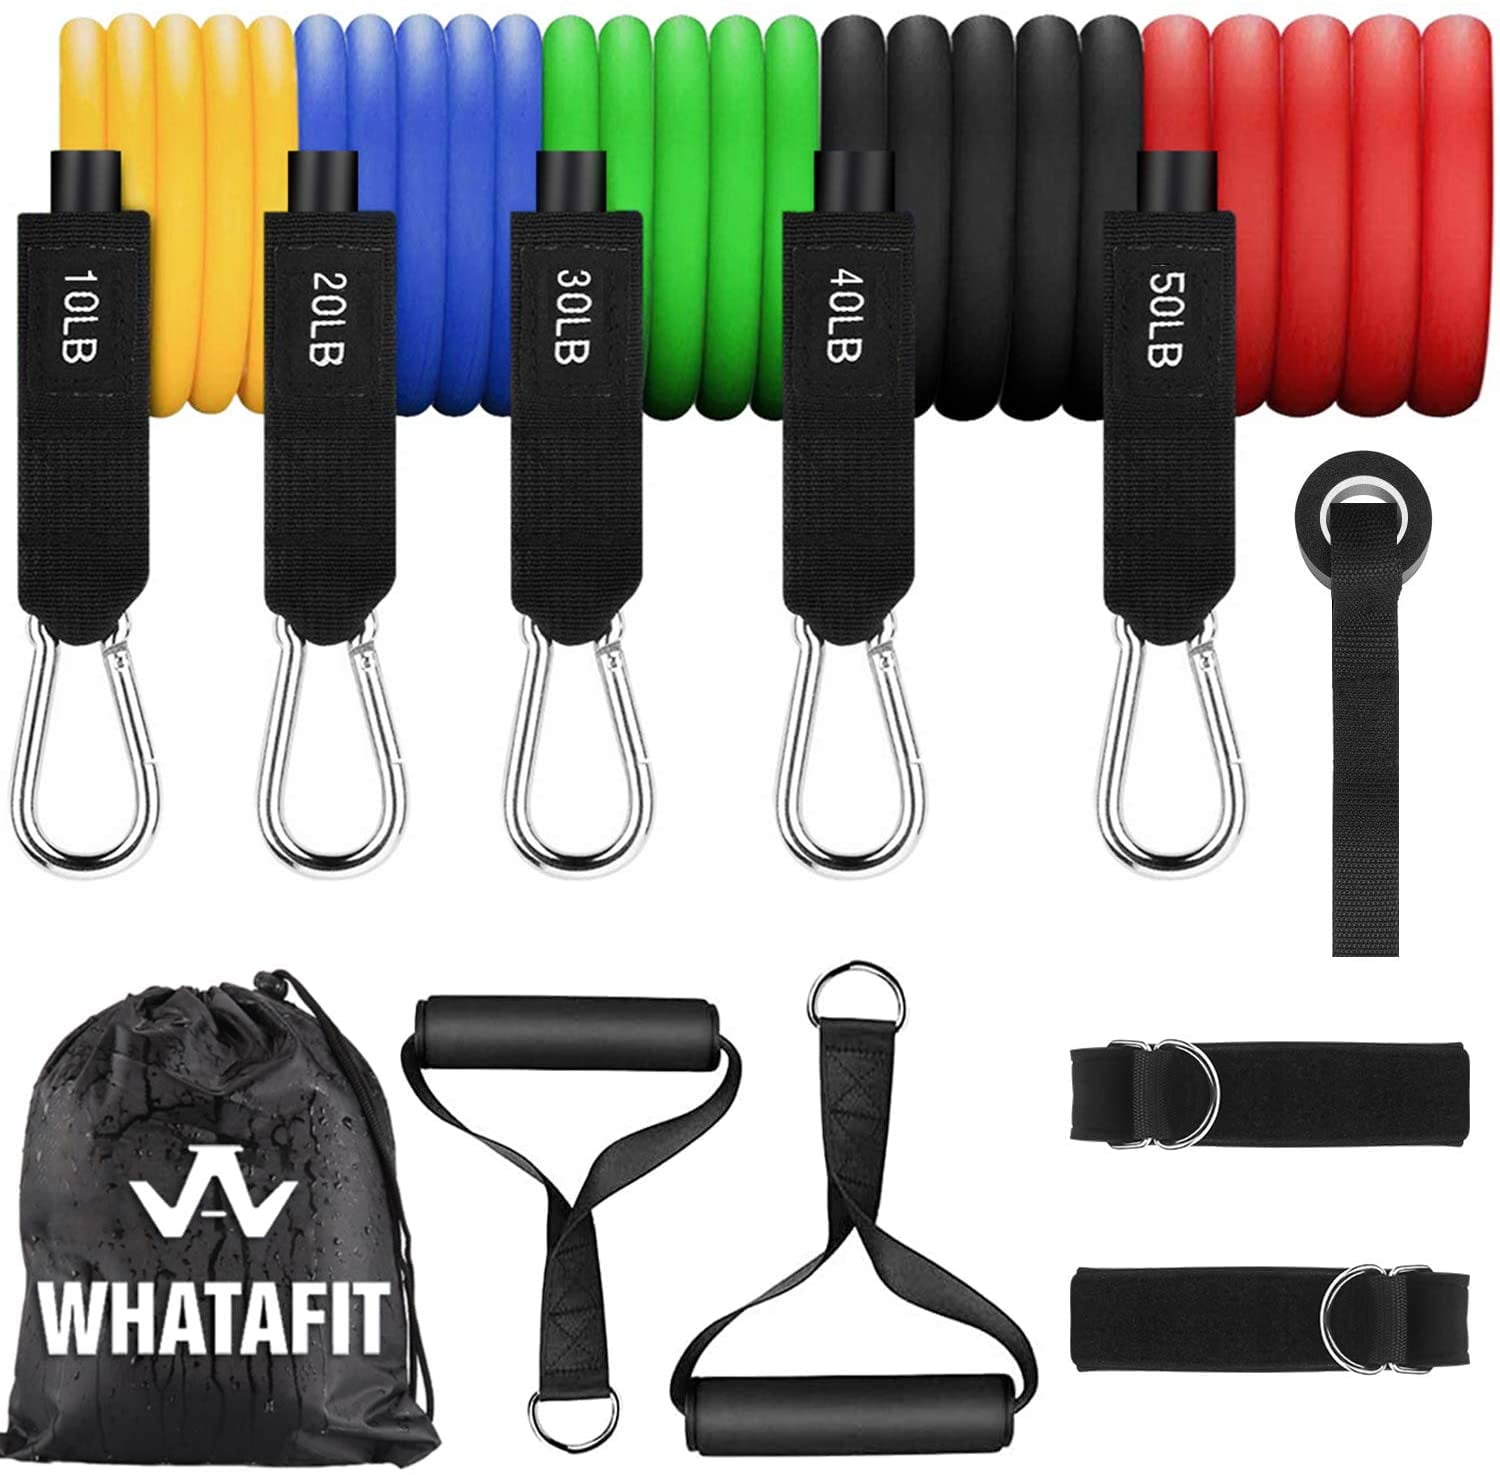 Resistance Bands Set 11 pcs Exercise Bands Stackable up to 100 lbs with Handles Door Anchors Ankle Straps Instruction for Indoor Outdoor Strength Training Weight Lifting